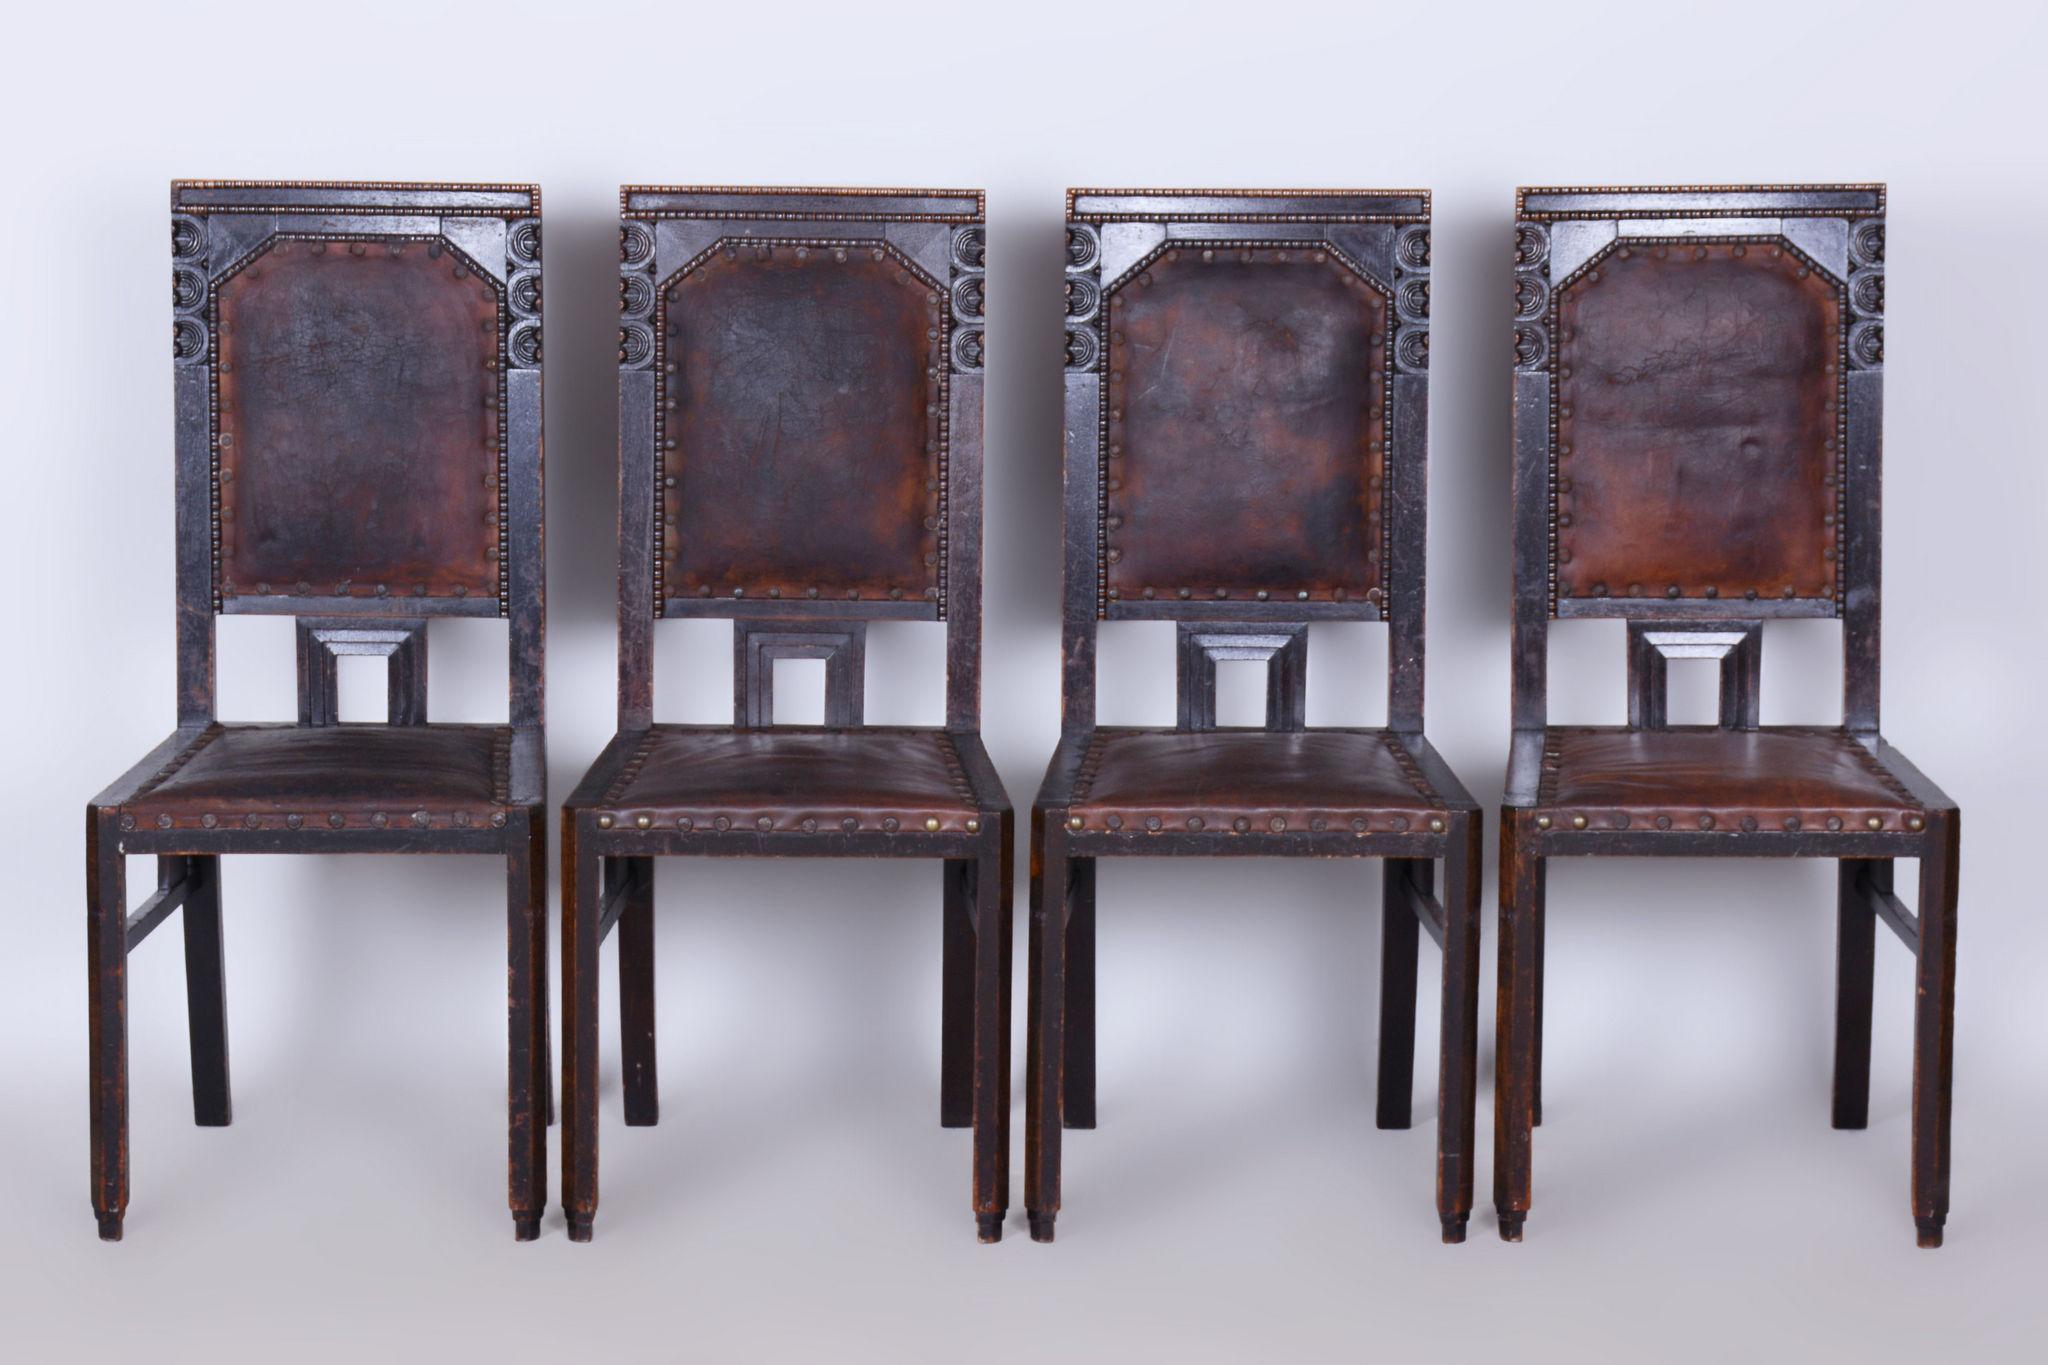 This set was designed by famous czech designer Josef Gočár as part of the interior of a family home in Hradec Králové (Czechoslovakia).

The upholstery is firm and not worn, but the condition and patina of the leather corresponds to age and use.

In